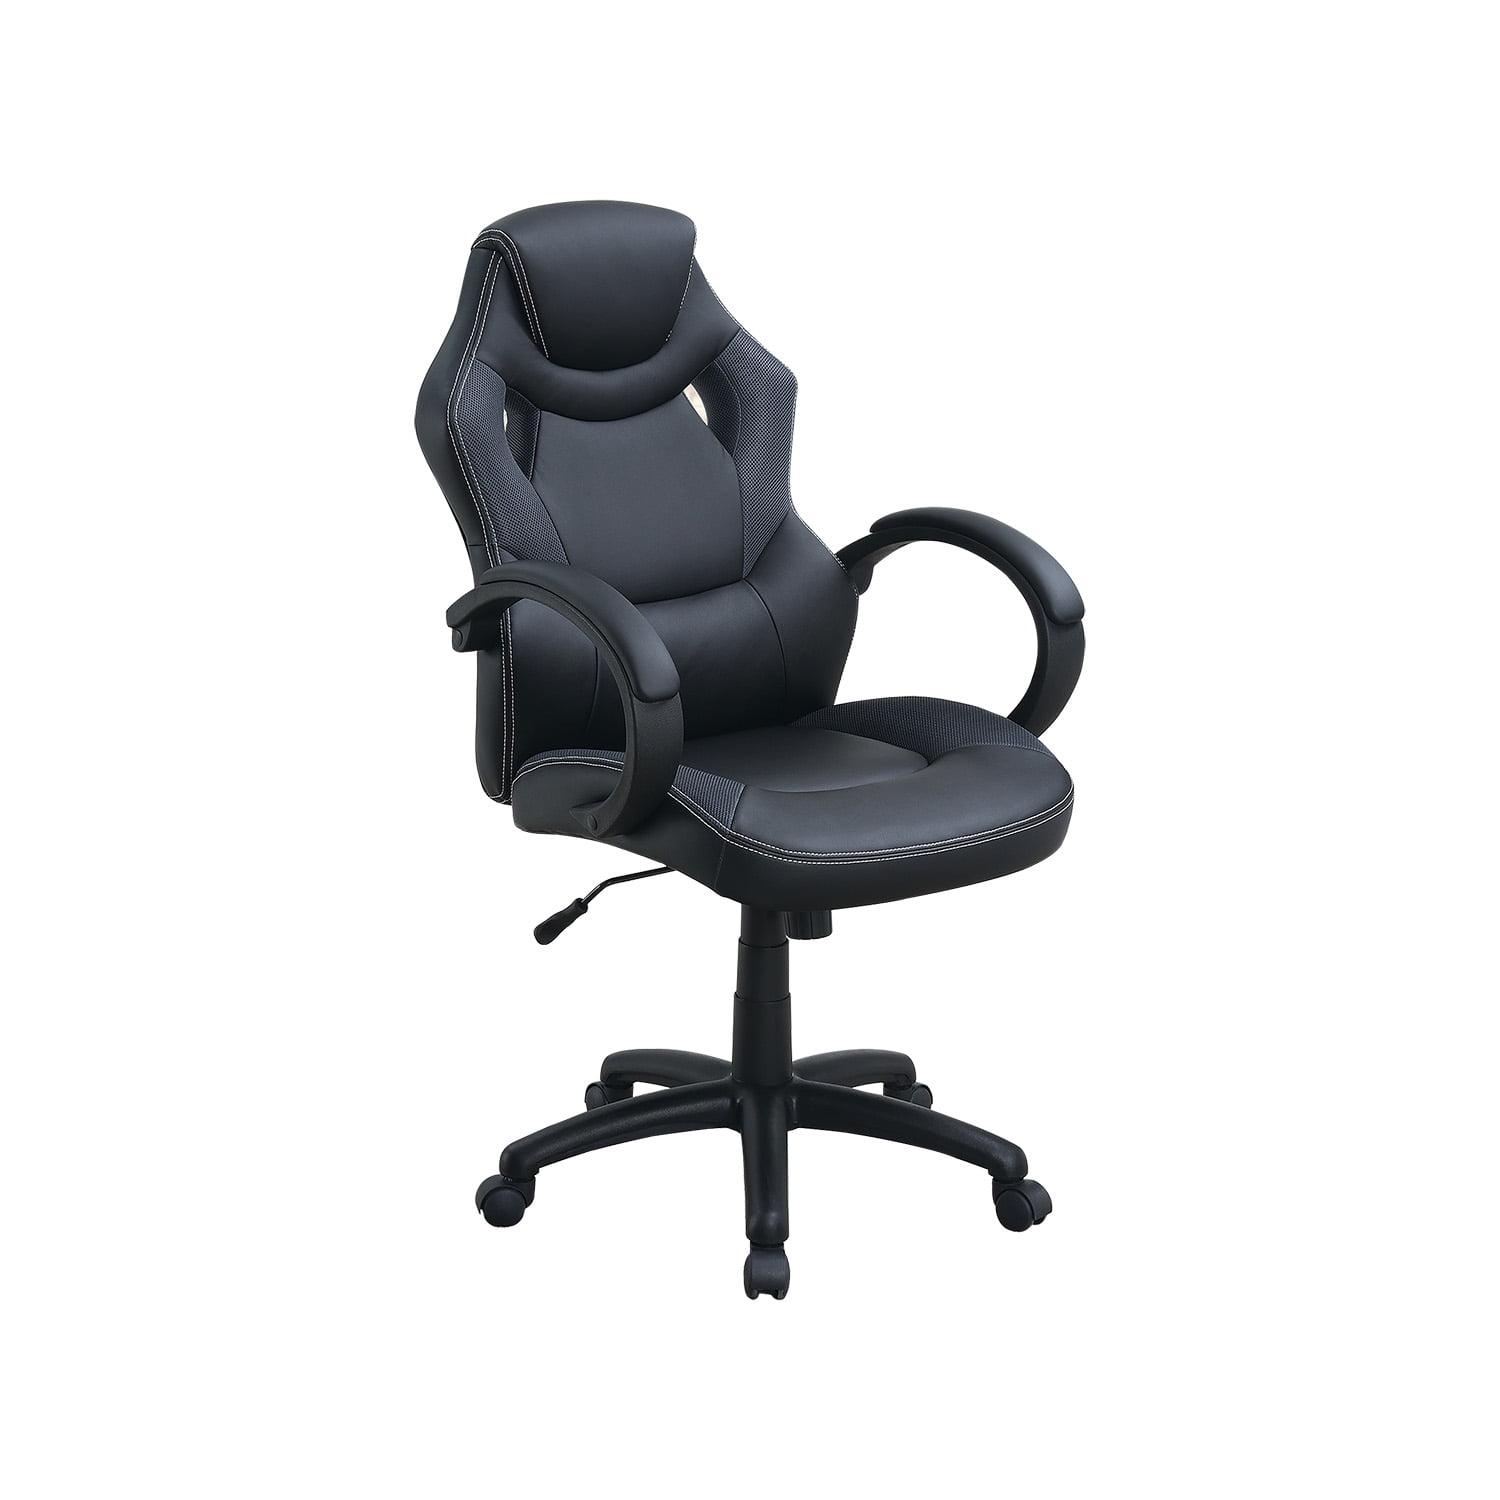 ErgoExec High-Back Black Leather Swivel Executive Chair with Adjustable Arms